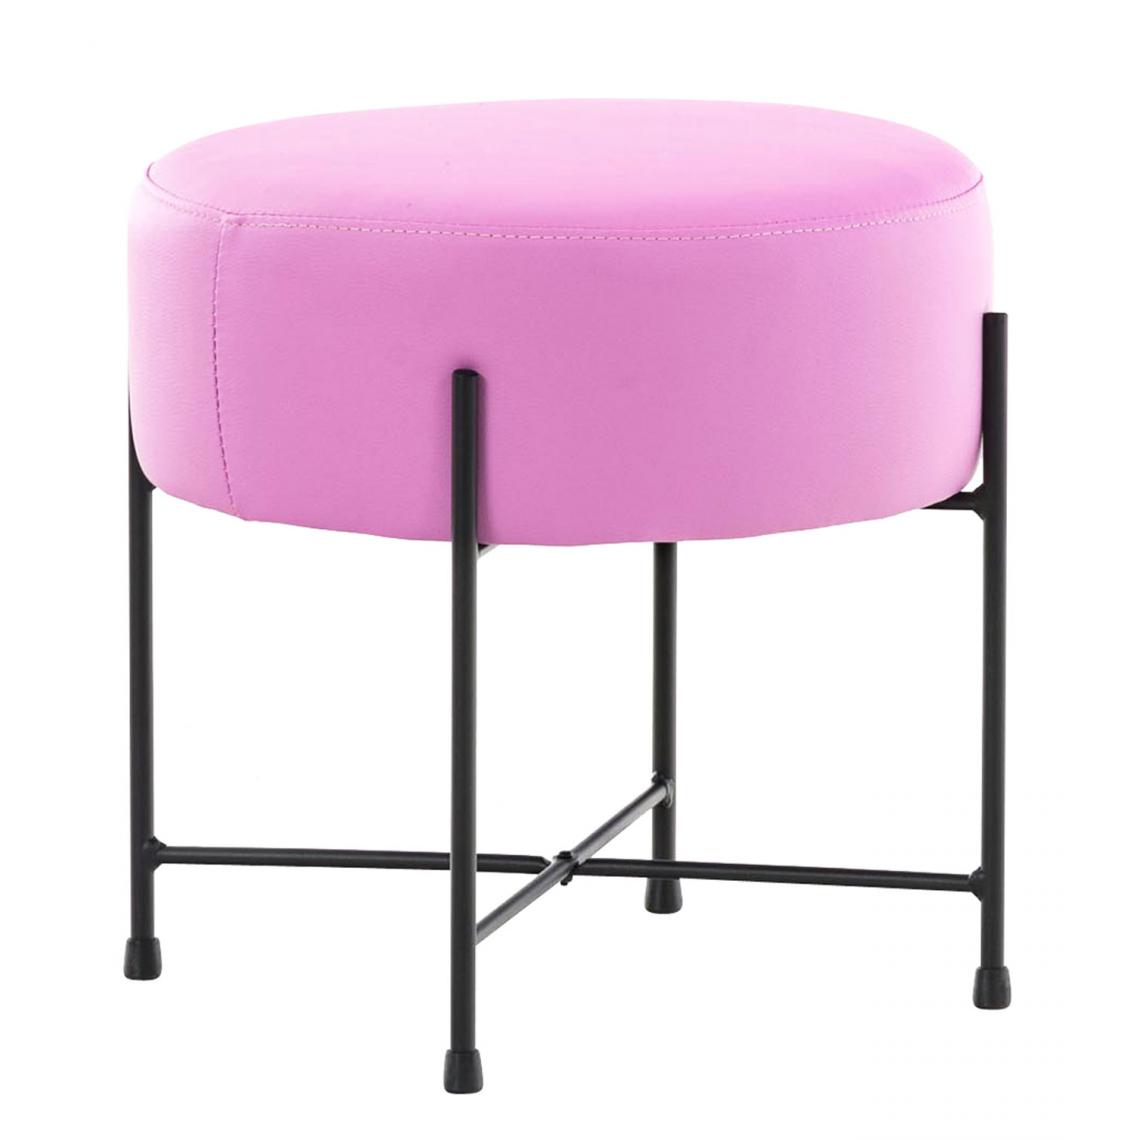 Icaverne - Splendide Tabouret selection Chi?in?u couleur rose - Chaises